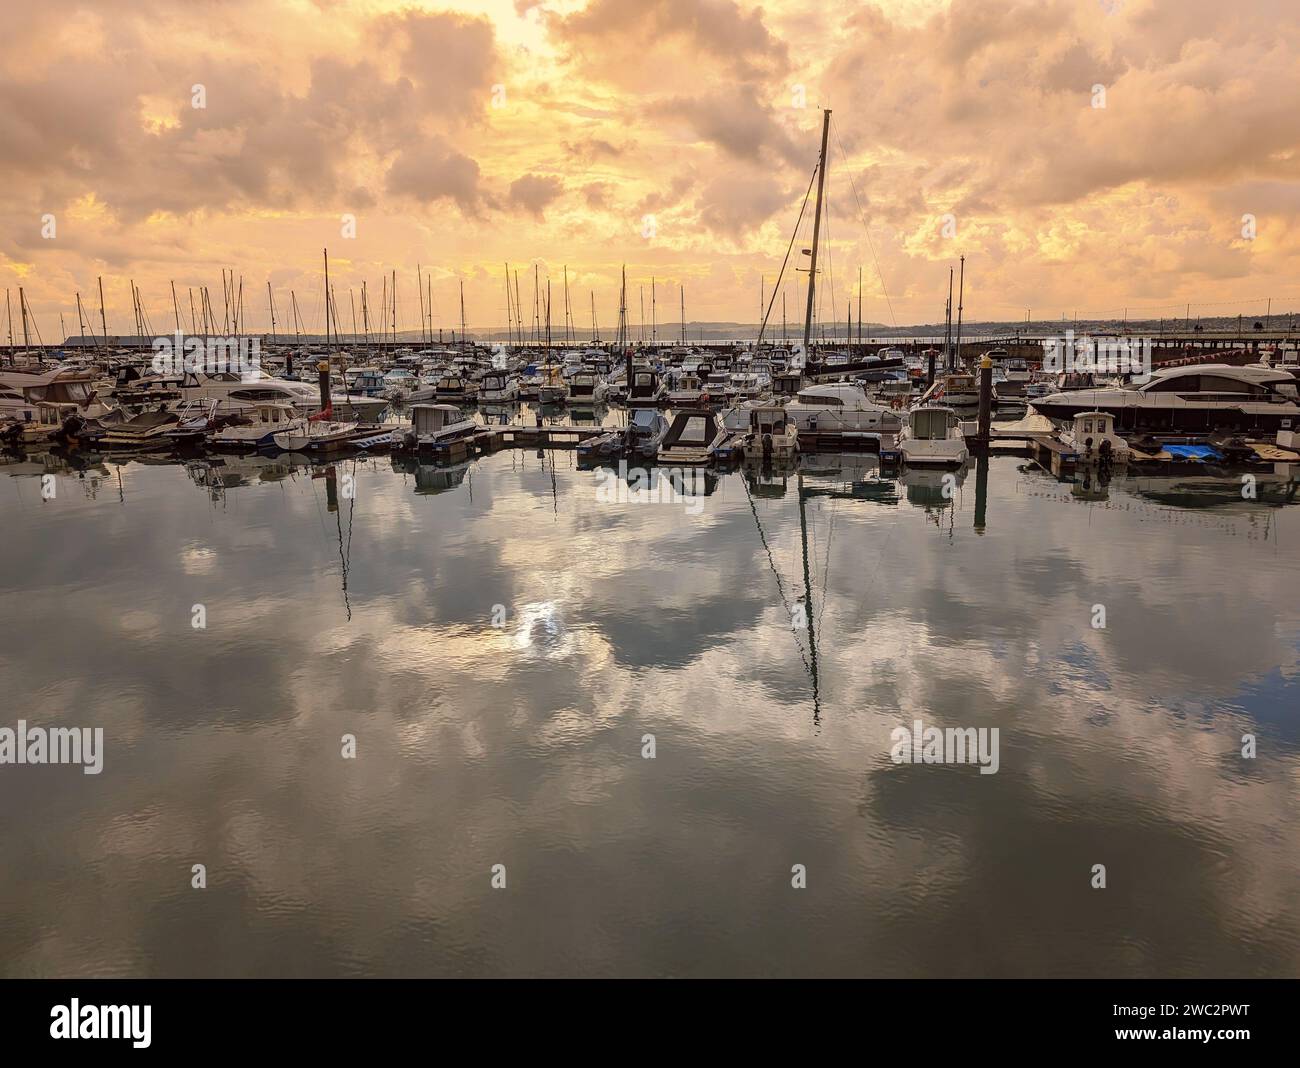 A fleet of boats docked in a marina, with calm waters creating a tranquil atmosphere. Torquay, England Stock Photo